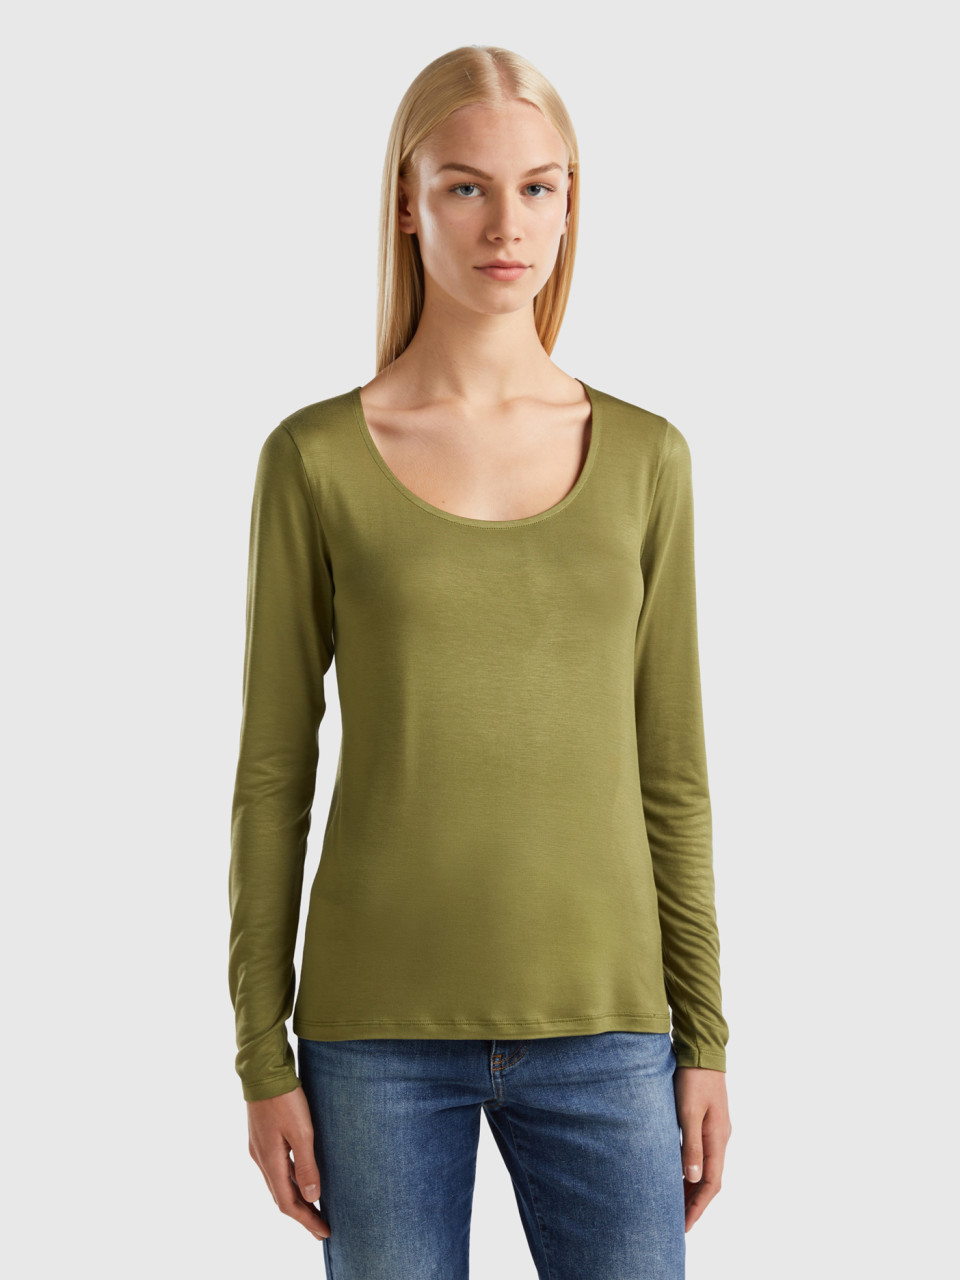 Benetton, T-shirt In Sustainable Stretch Viscose, Military Green, Women